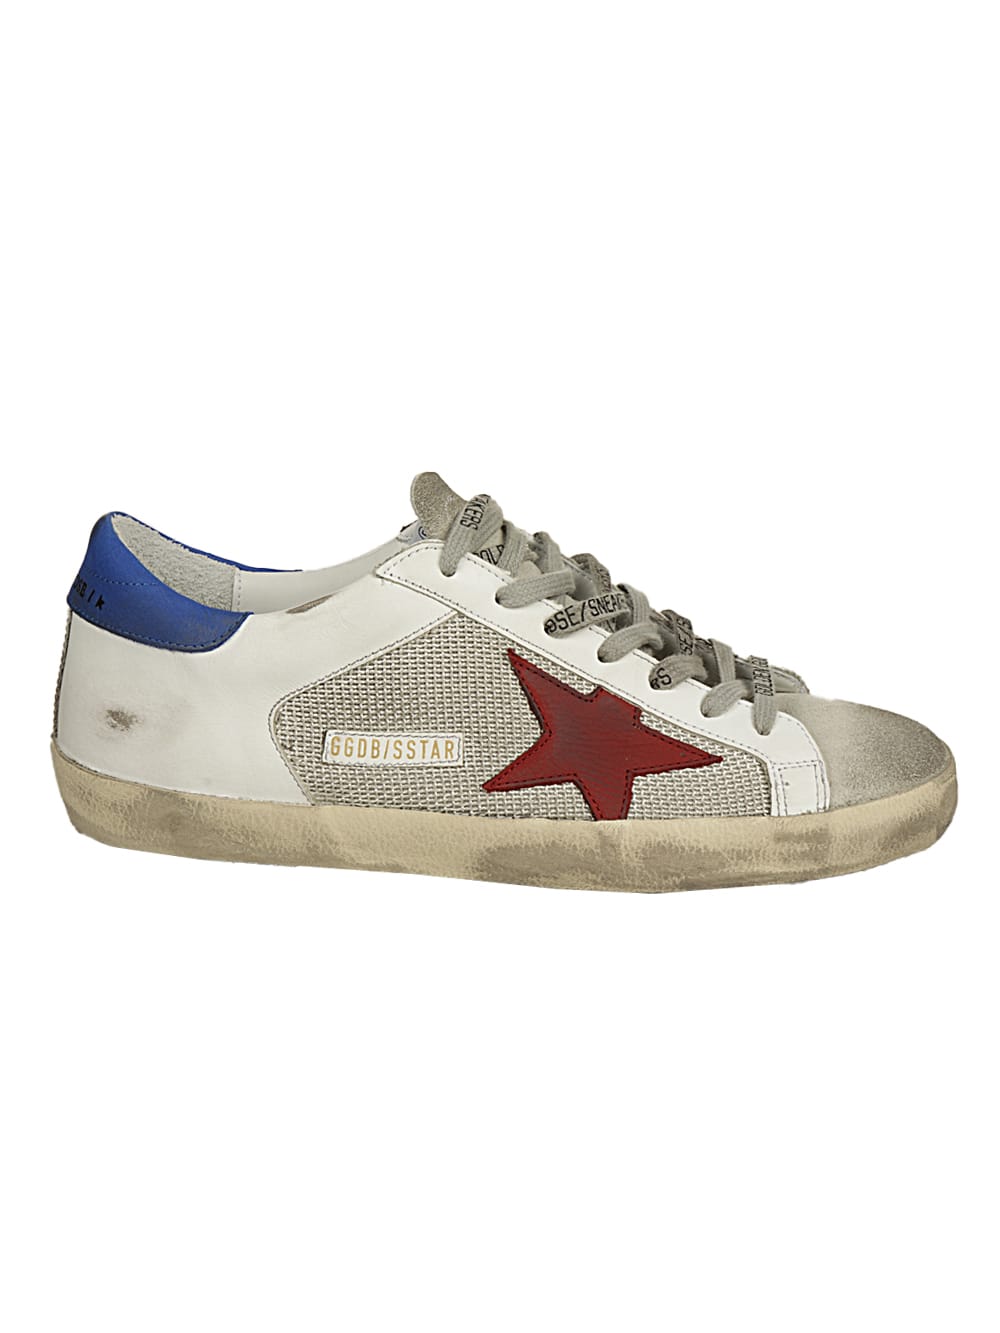 Golden Goose Superstar Net And Leather Upper Nabuk Star And Hee In Silver/white/red/blue